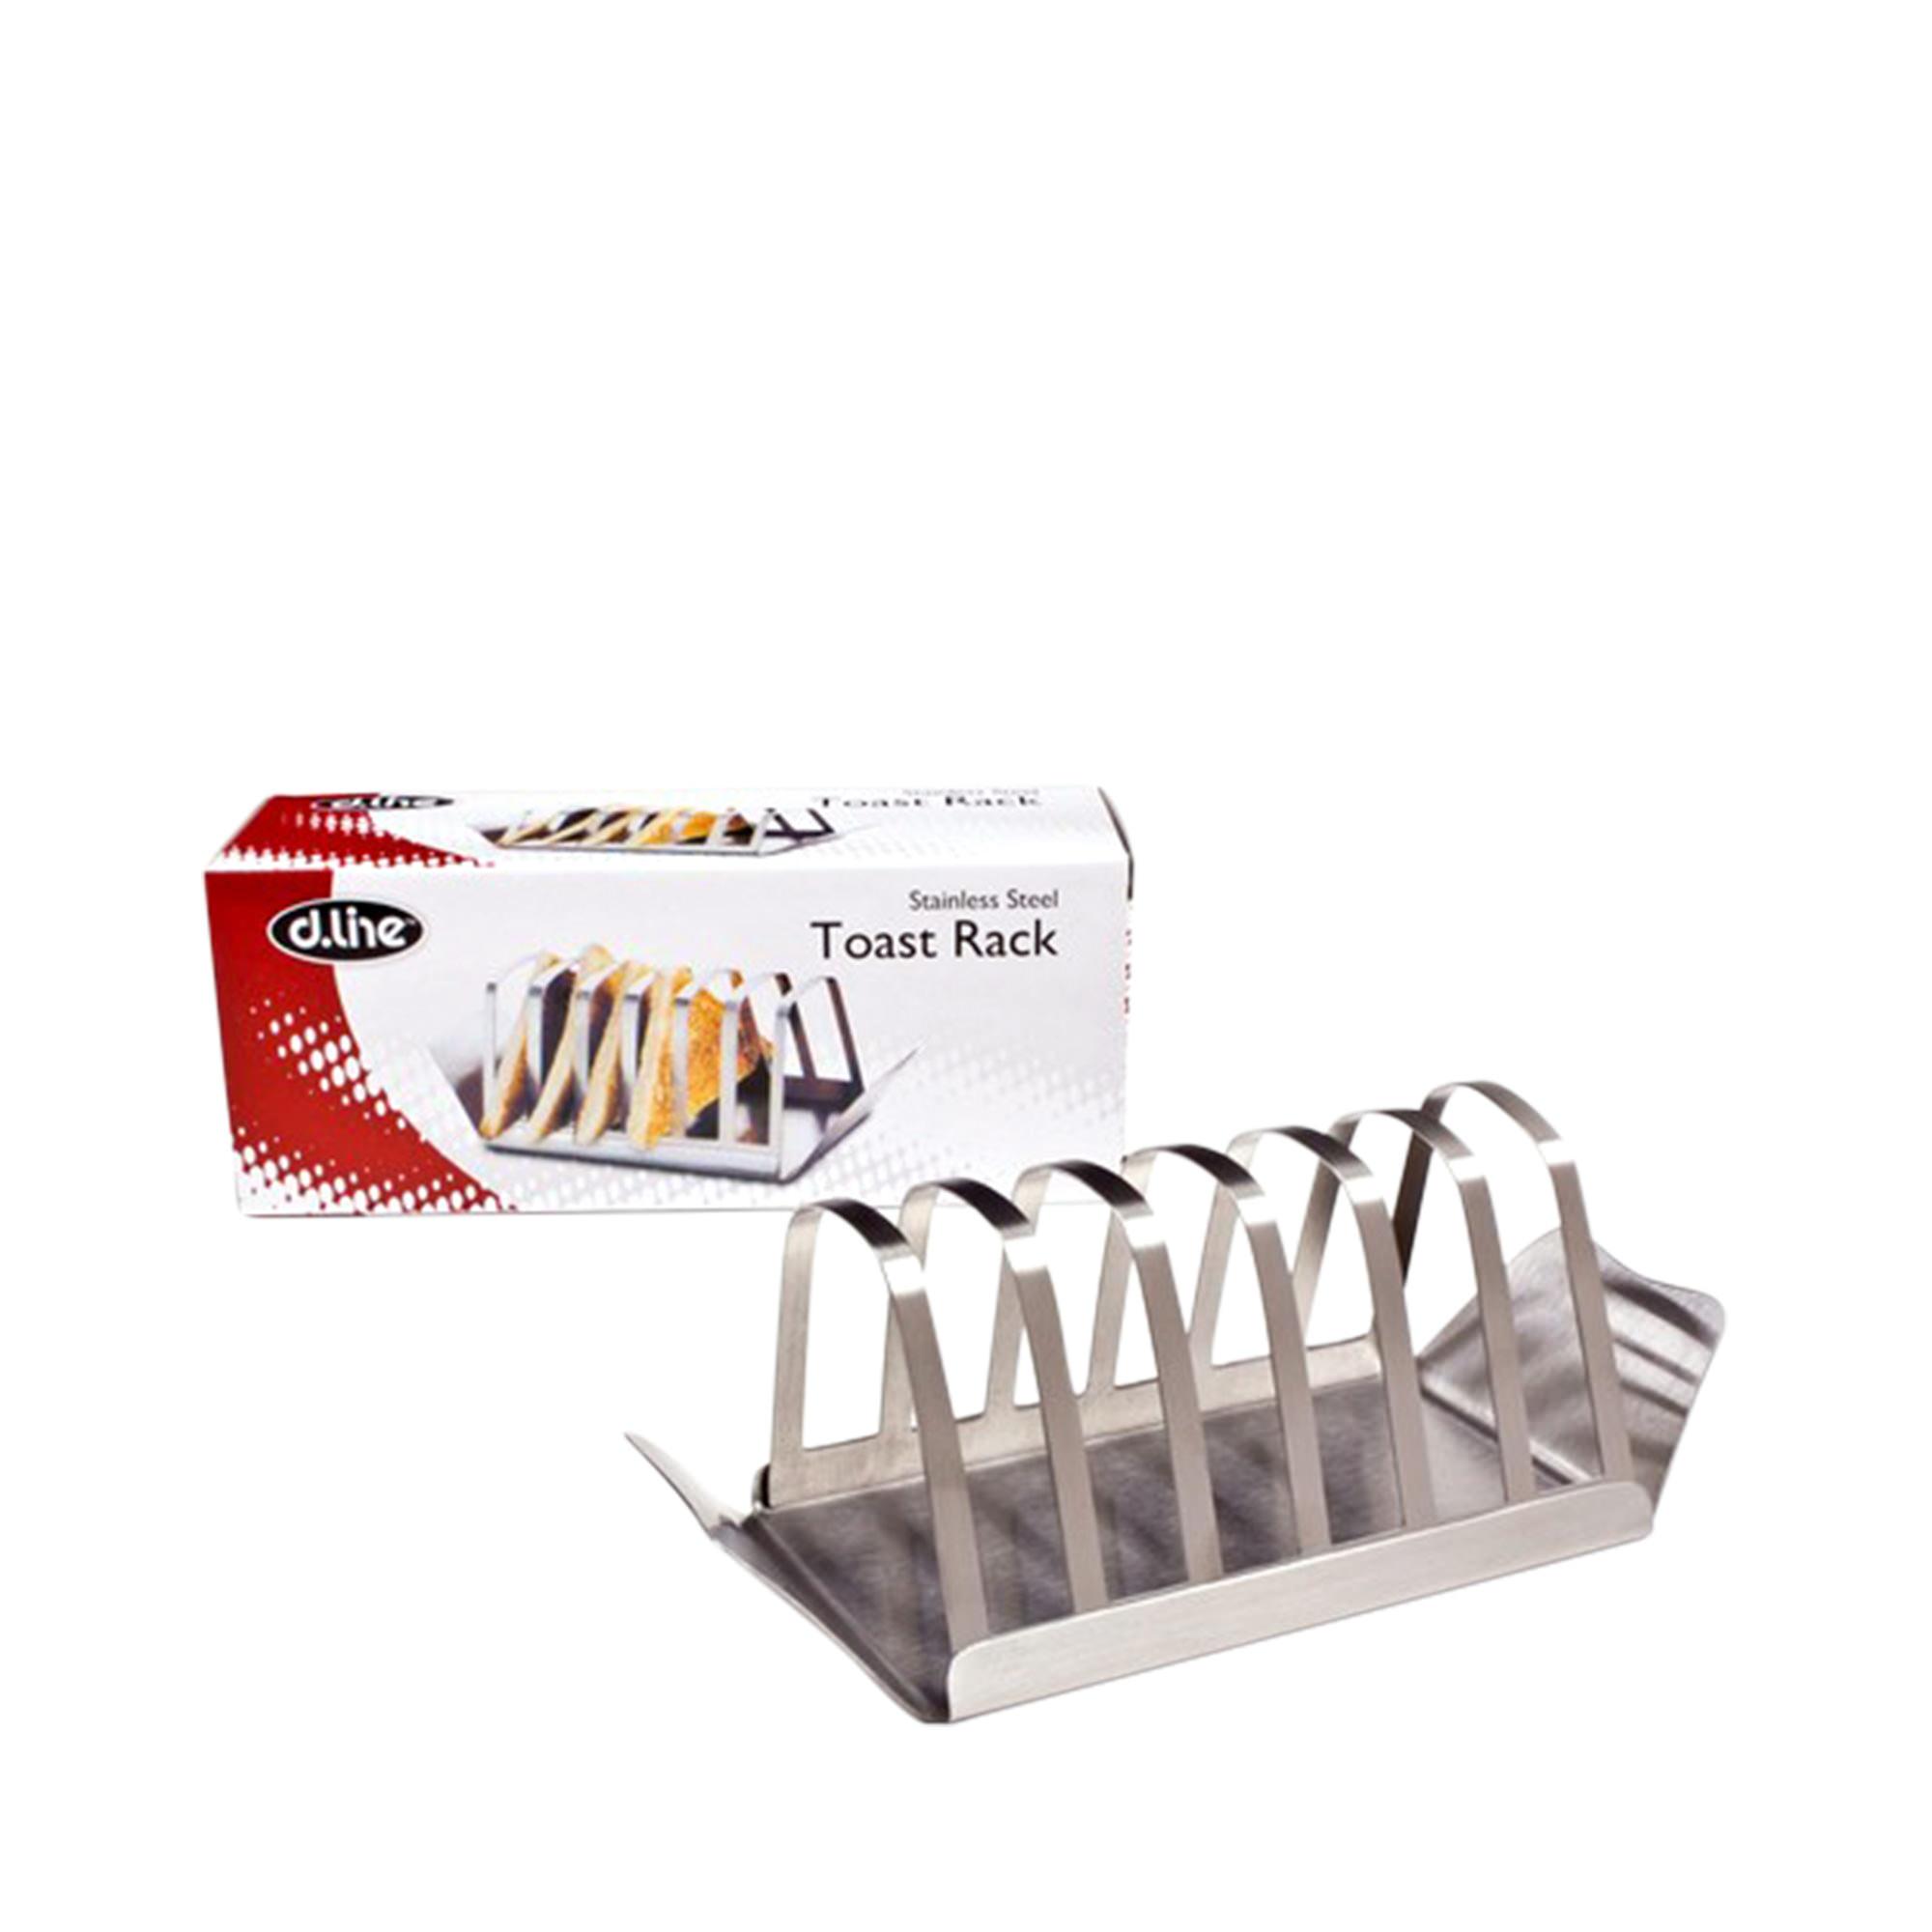 Appetito Stainless Steel Toast Rack with Tray Image 1